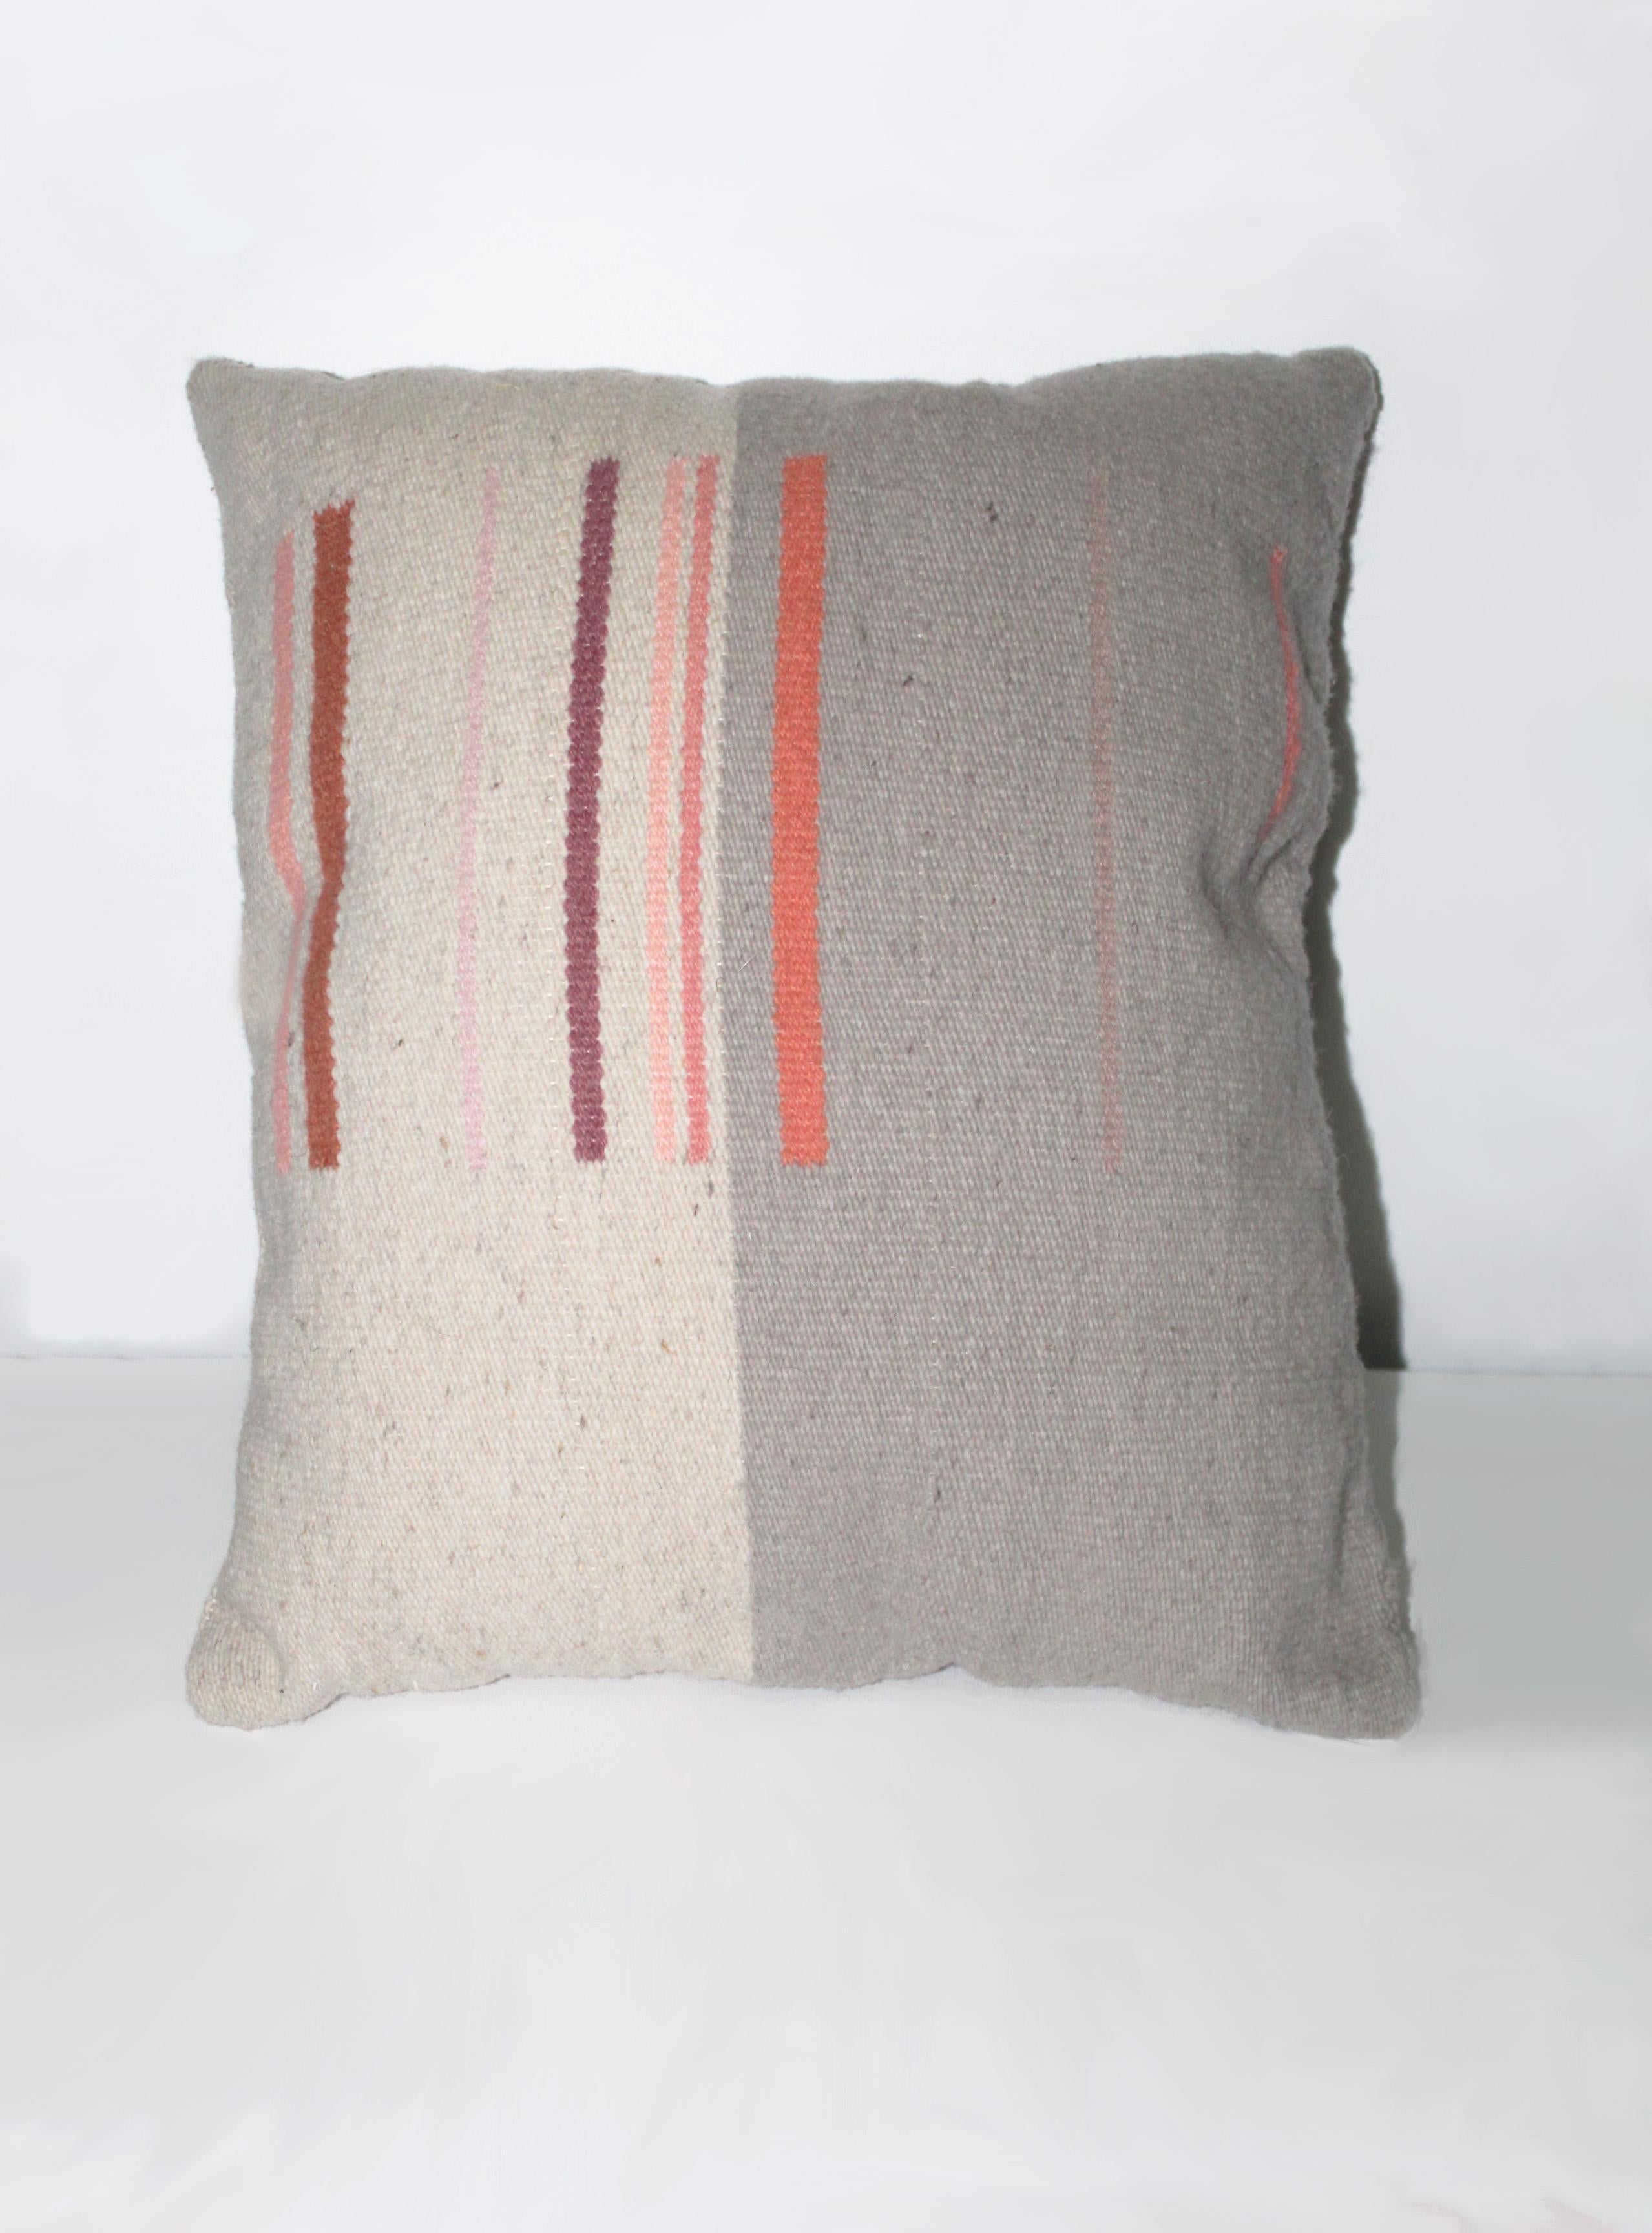 Contemporary Handwoven Wool Throw Pillow, Natural Dye, Pink and Grey (amerikanisch)